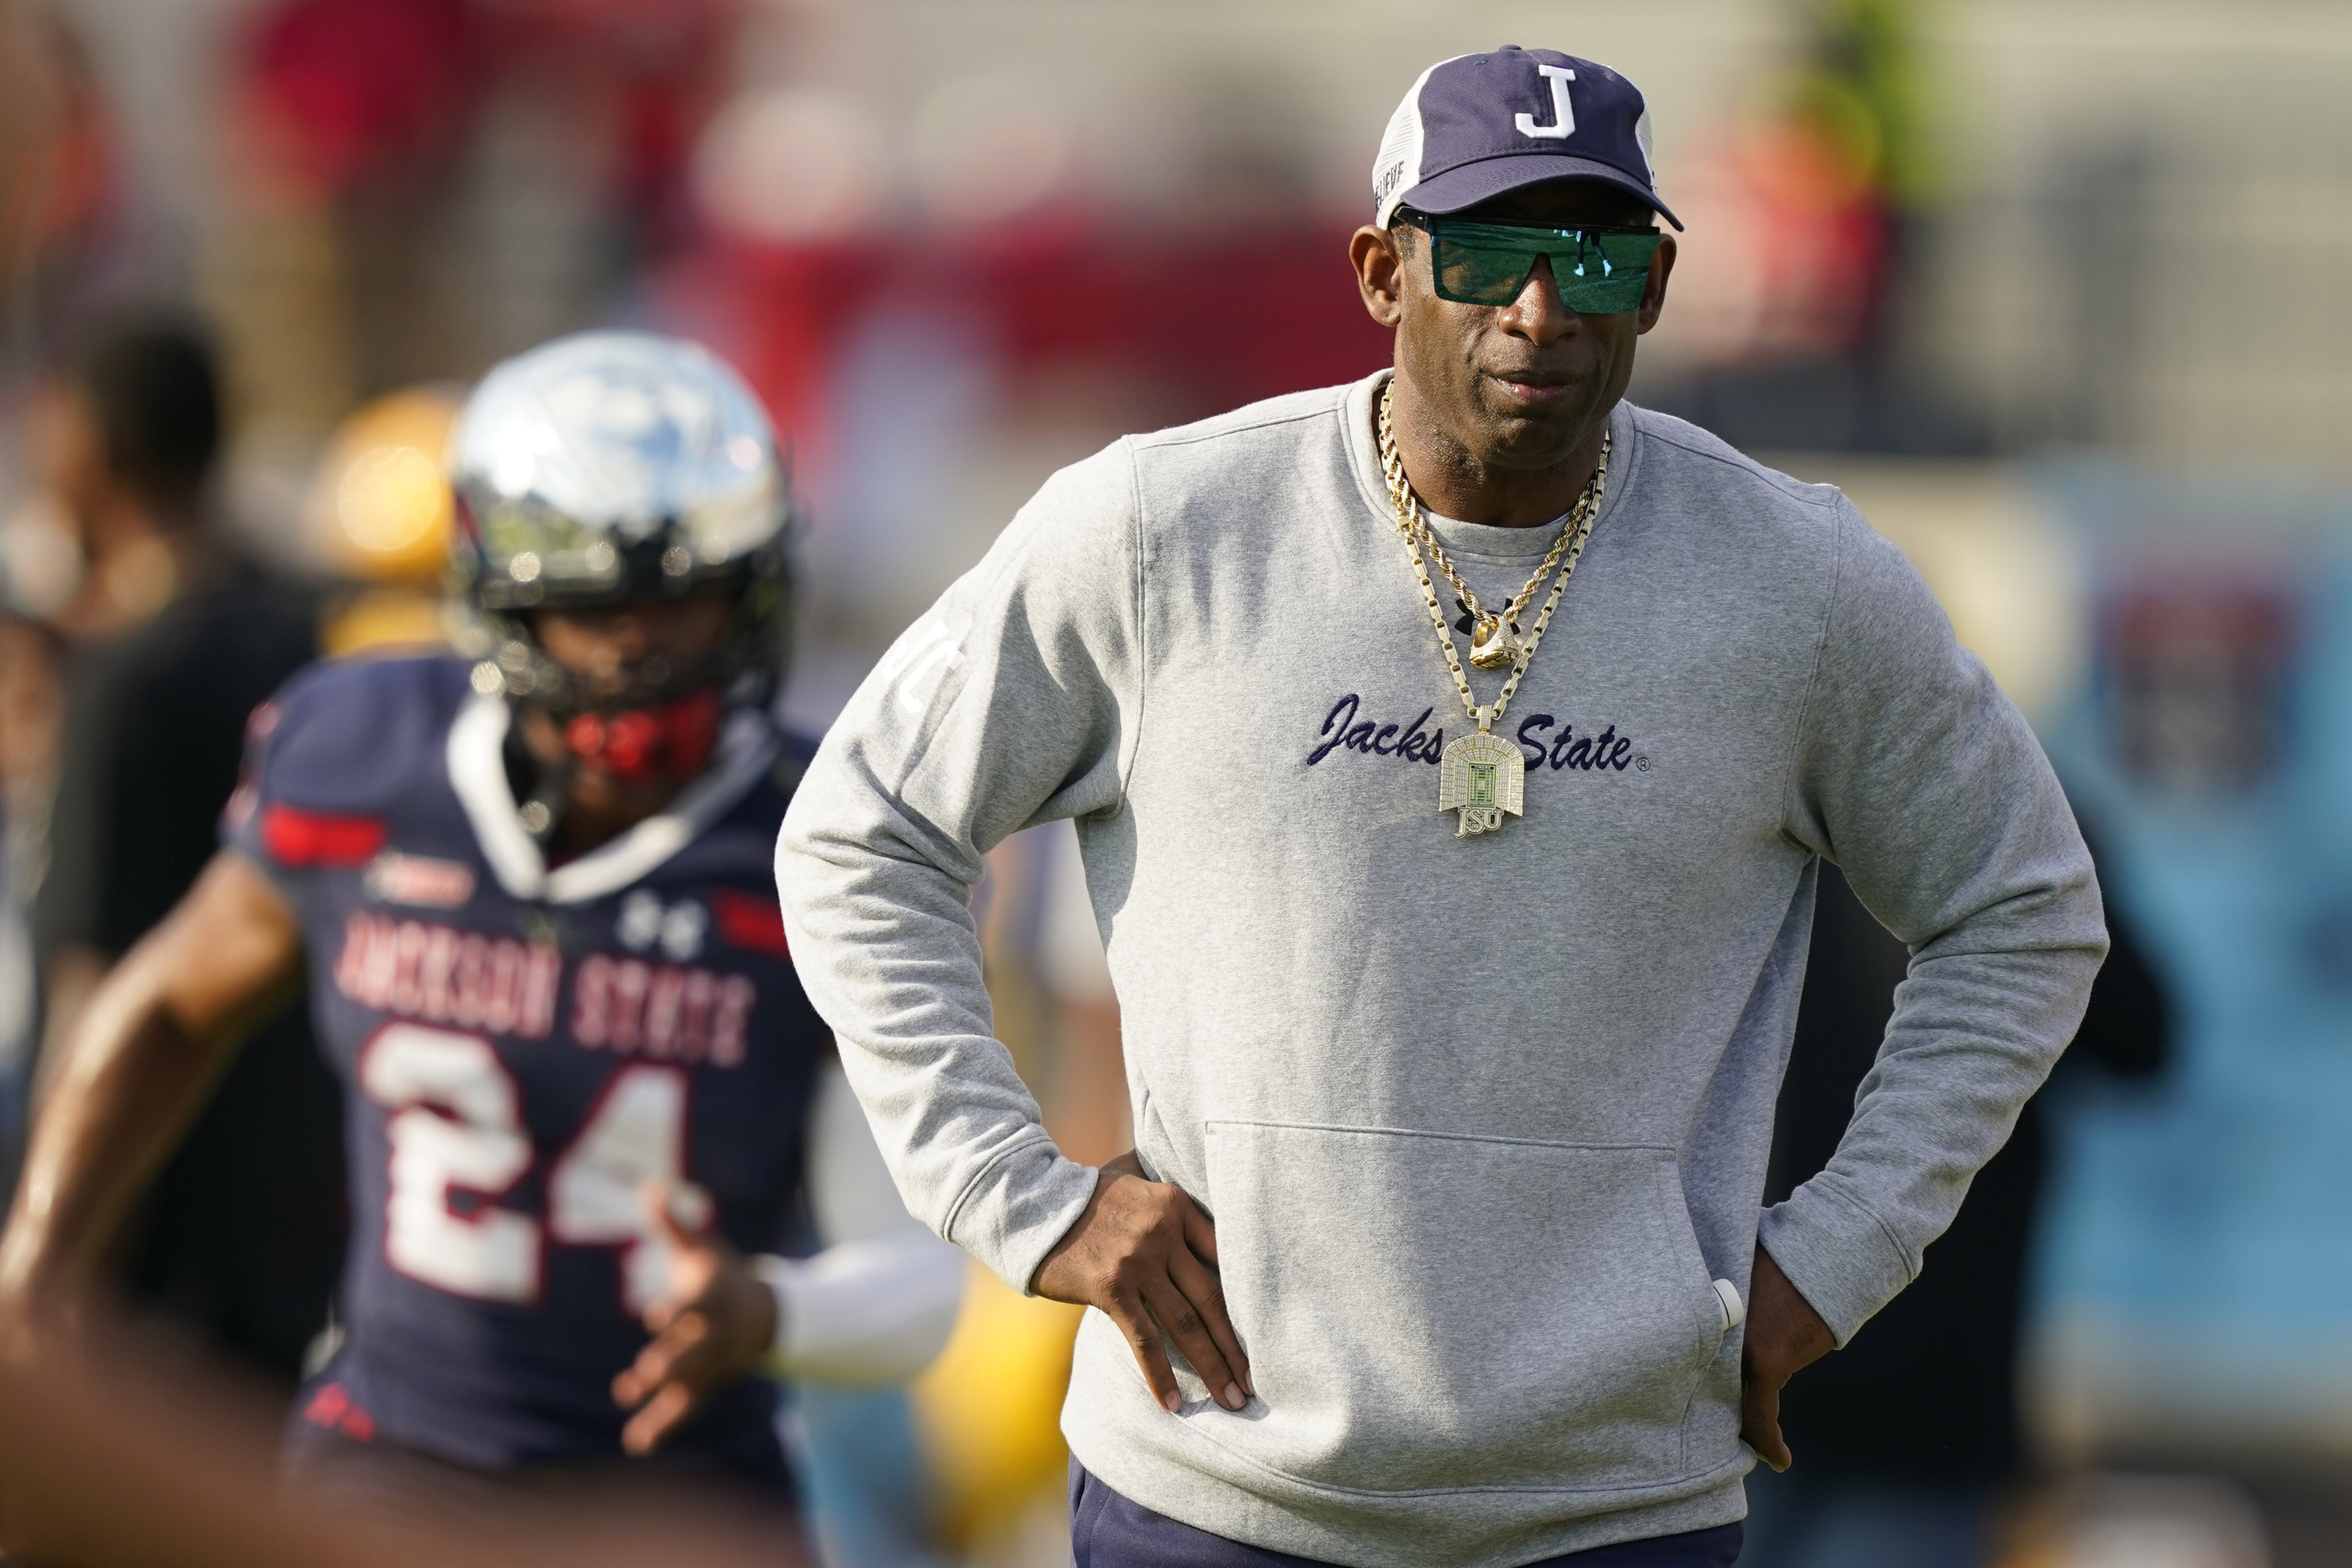 Jackson State falls in overtime in Deion Sanders' final game